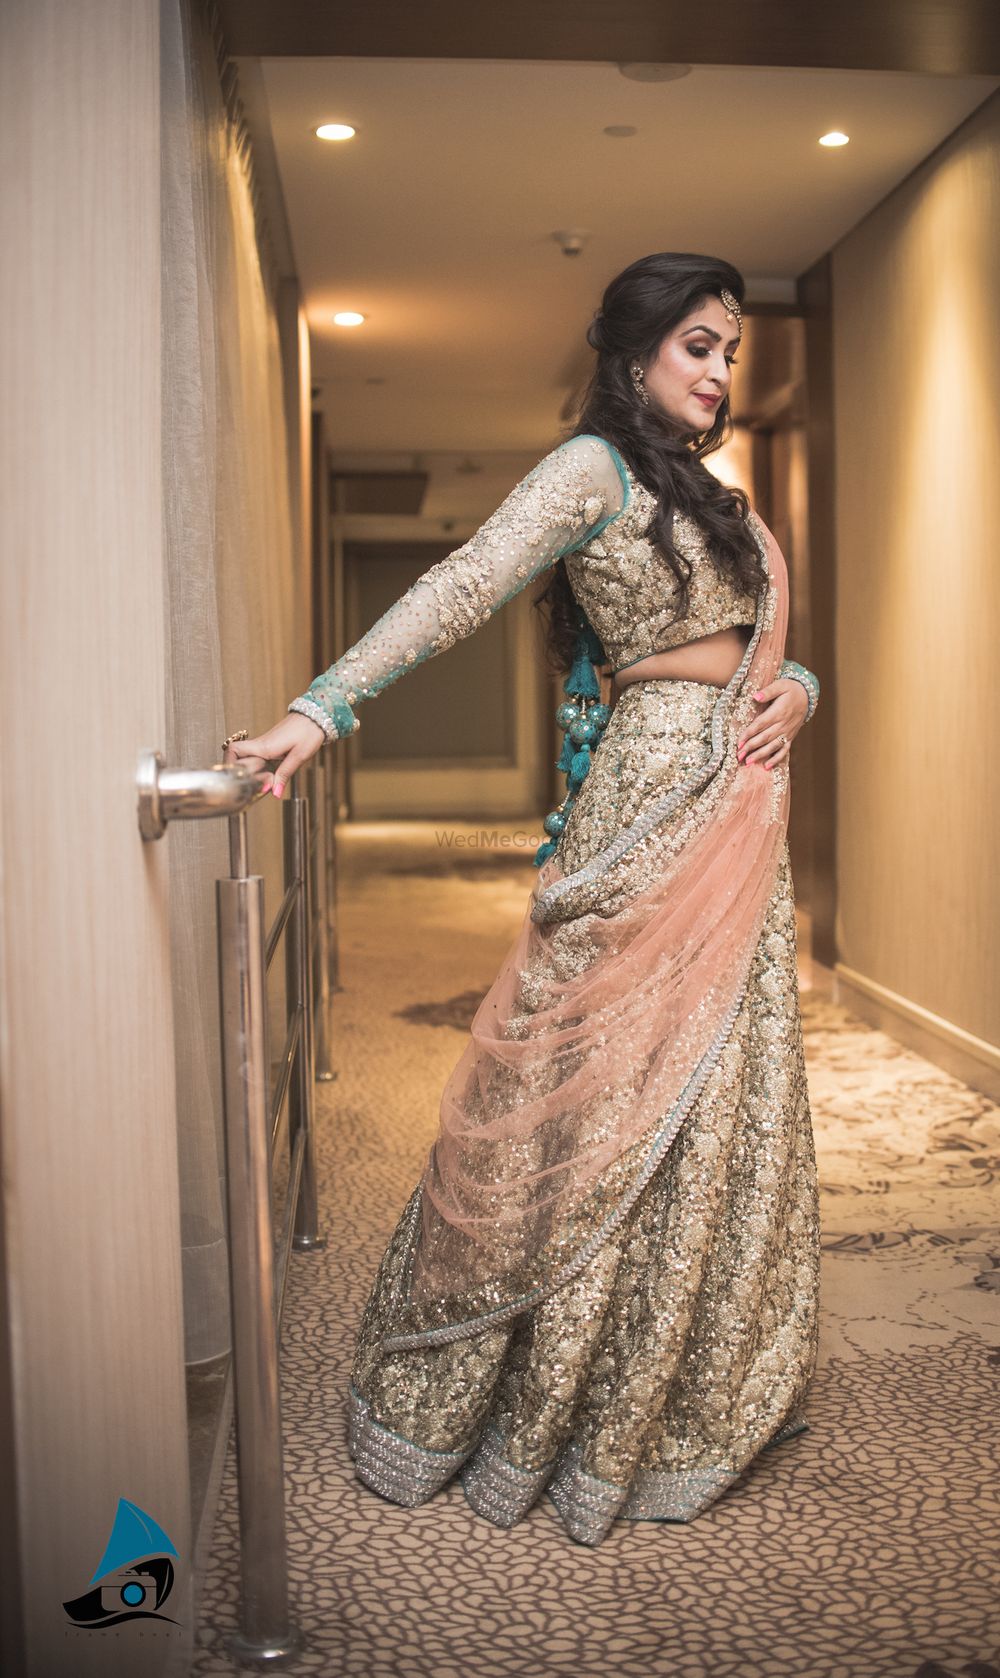 Photo of Shimmer Gold Lehenga with Teal Border